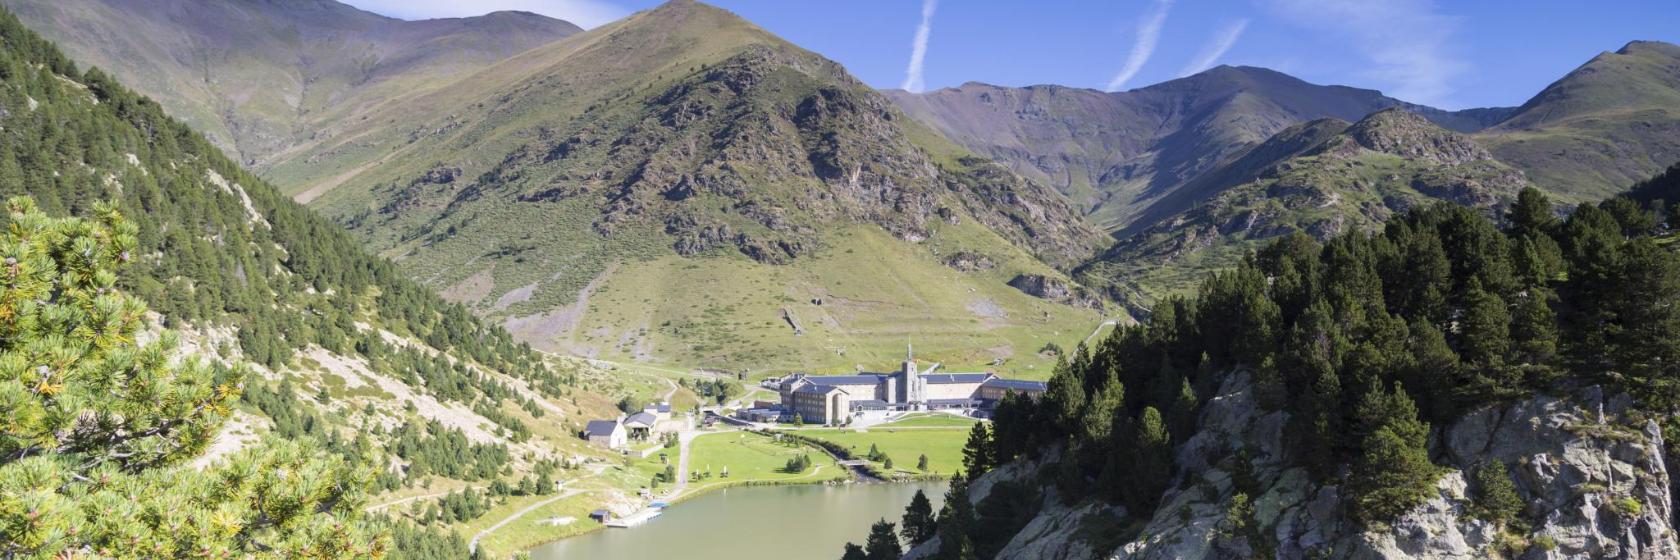 The 10 Best Vall de Nuria Hotels - Where To Stay in Vall de Nuria, Spain